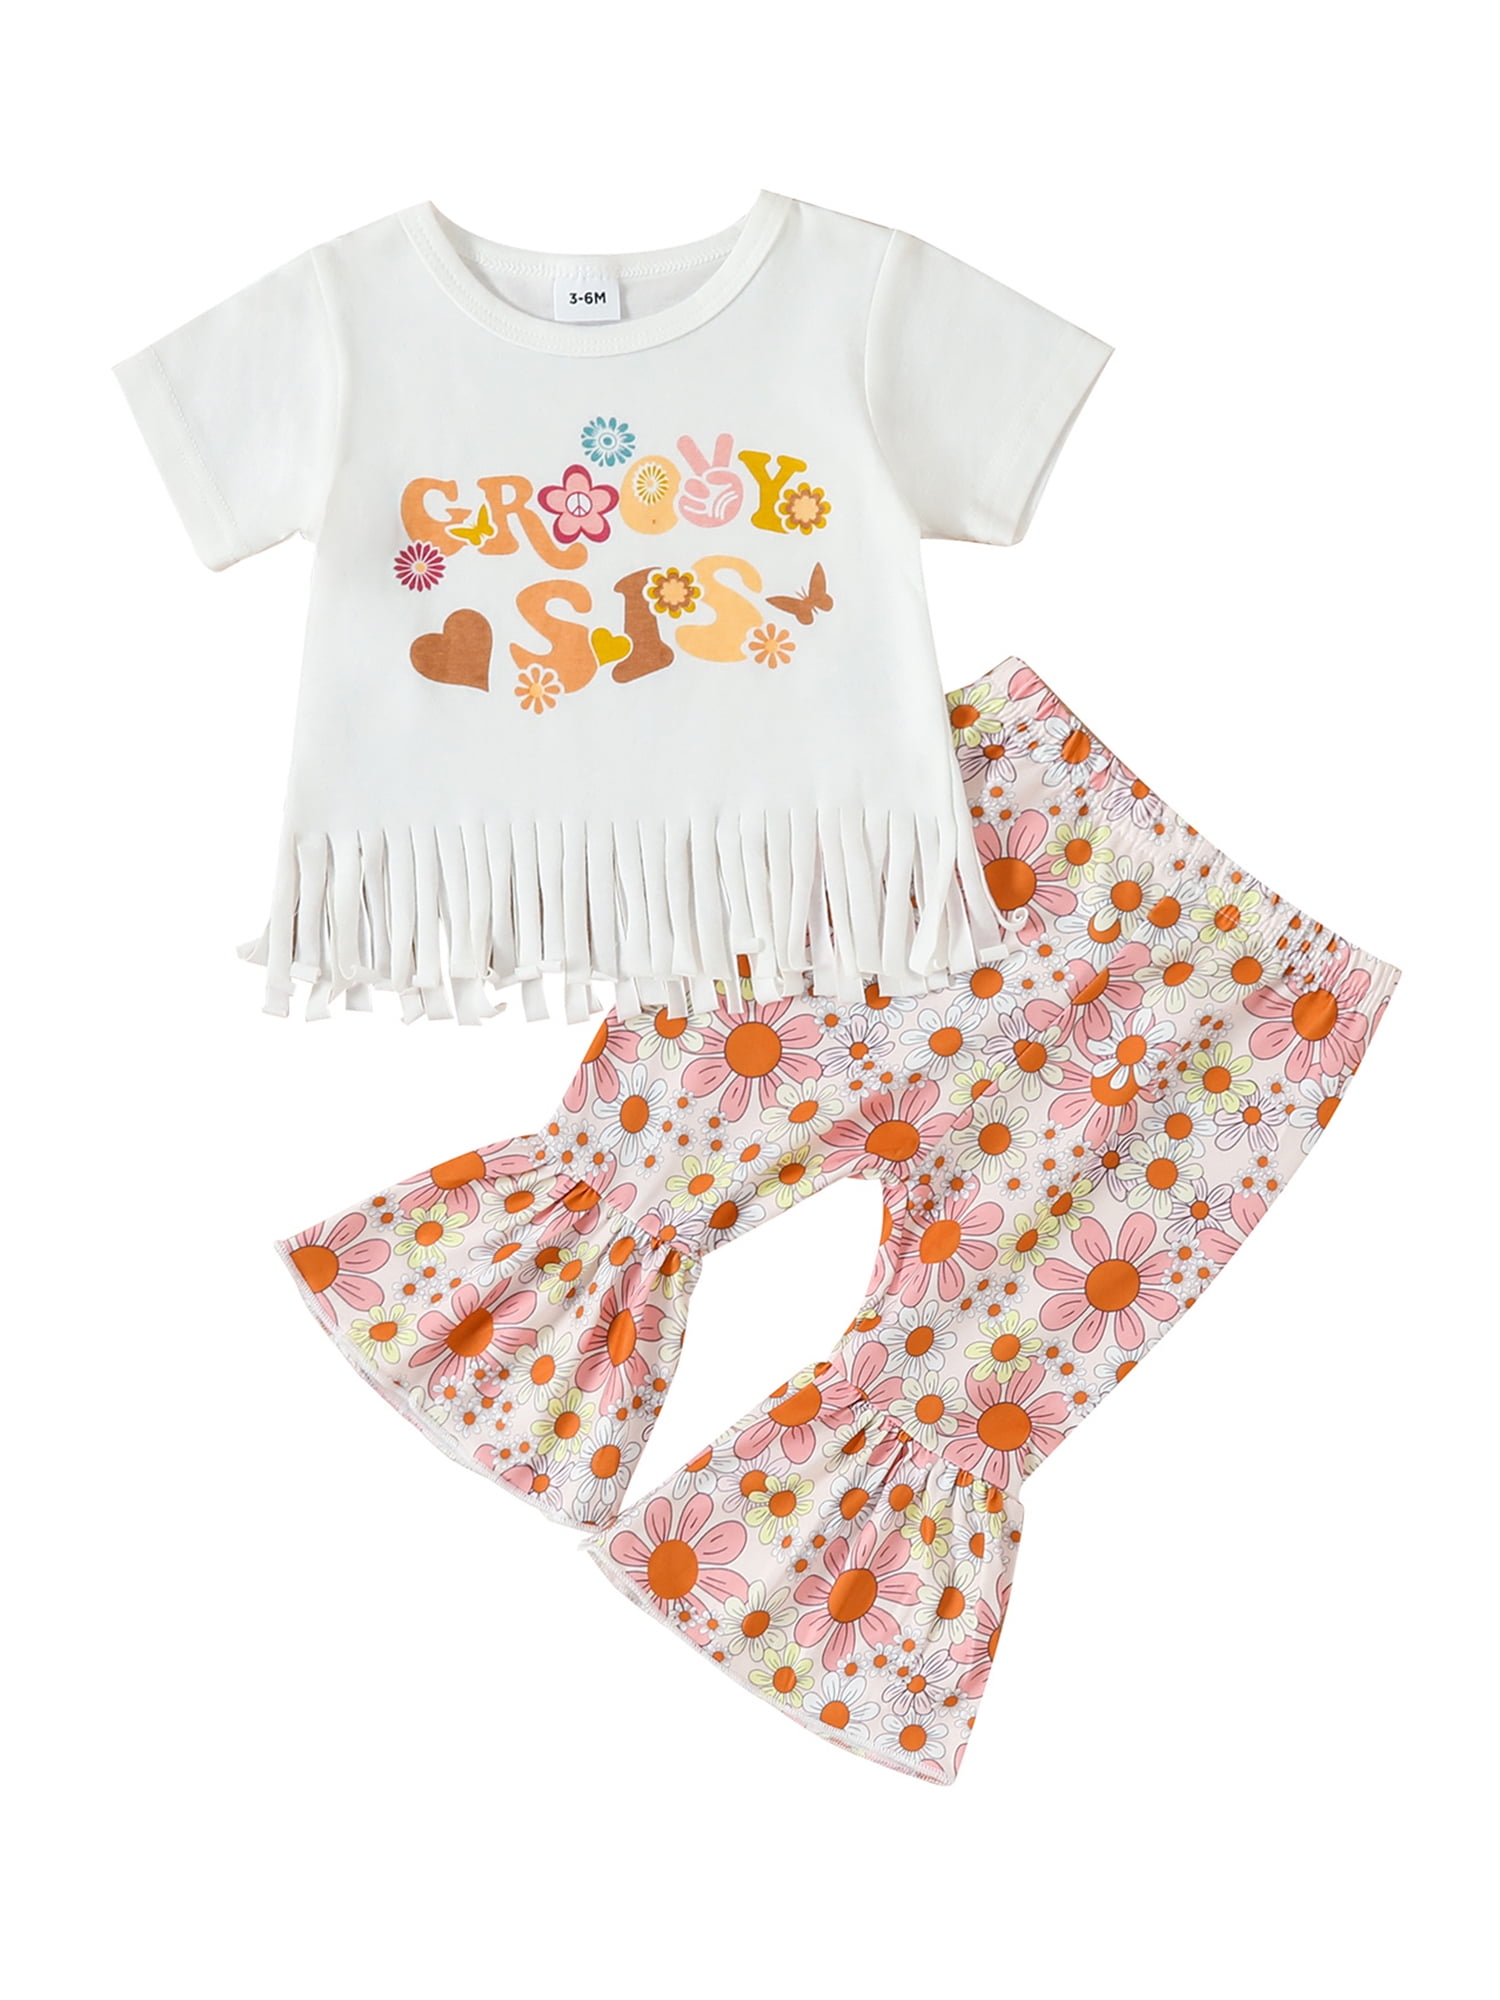 Daddy's Little Girls Summer Outfits Letter Print Short Sleeve T-Shirt with  Tassel and Floral Flare Pants Set 2Pcs Clothes 